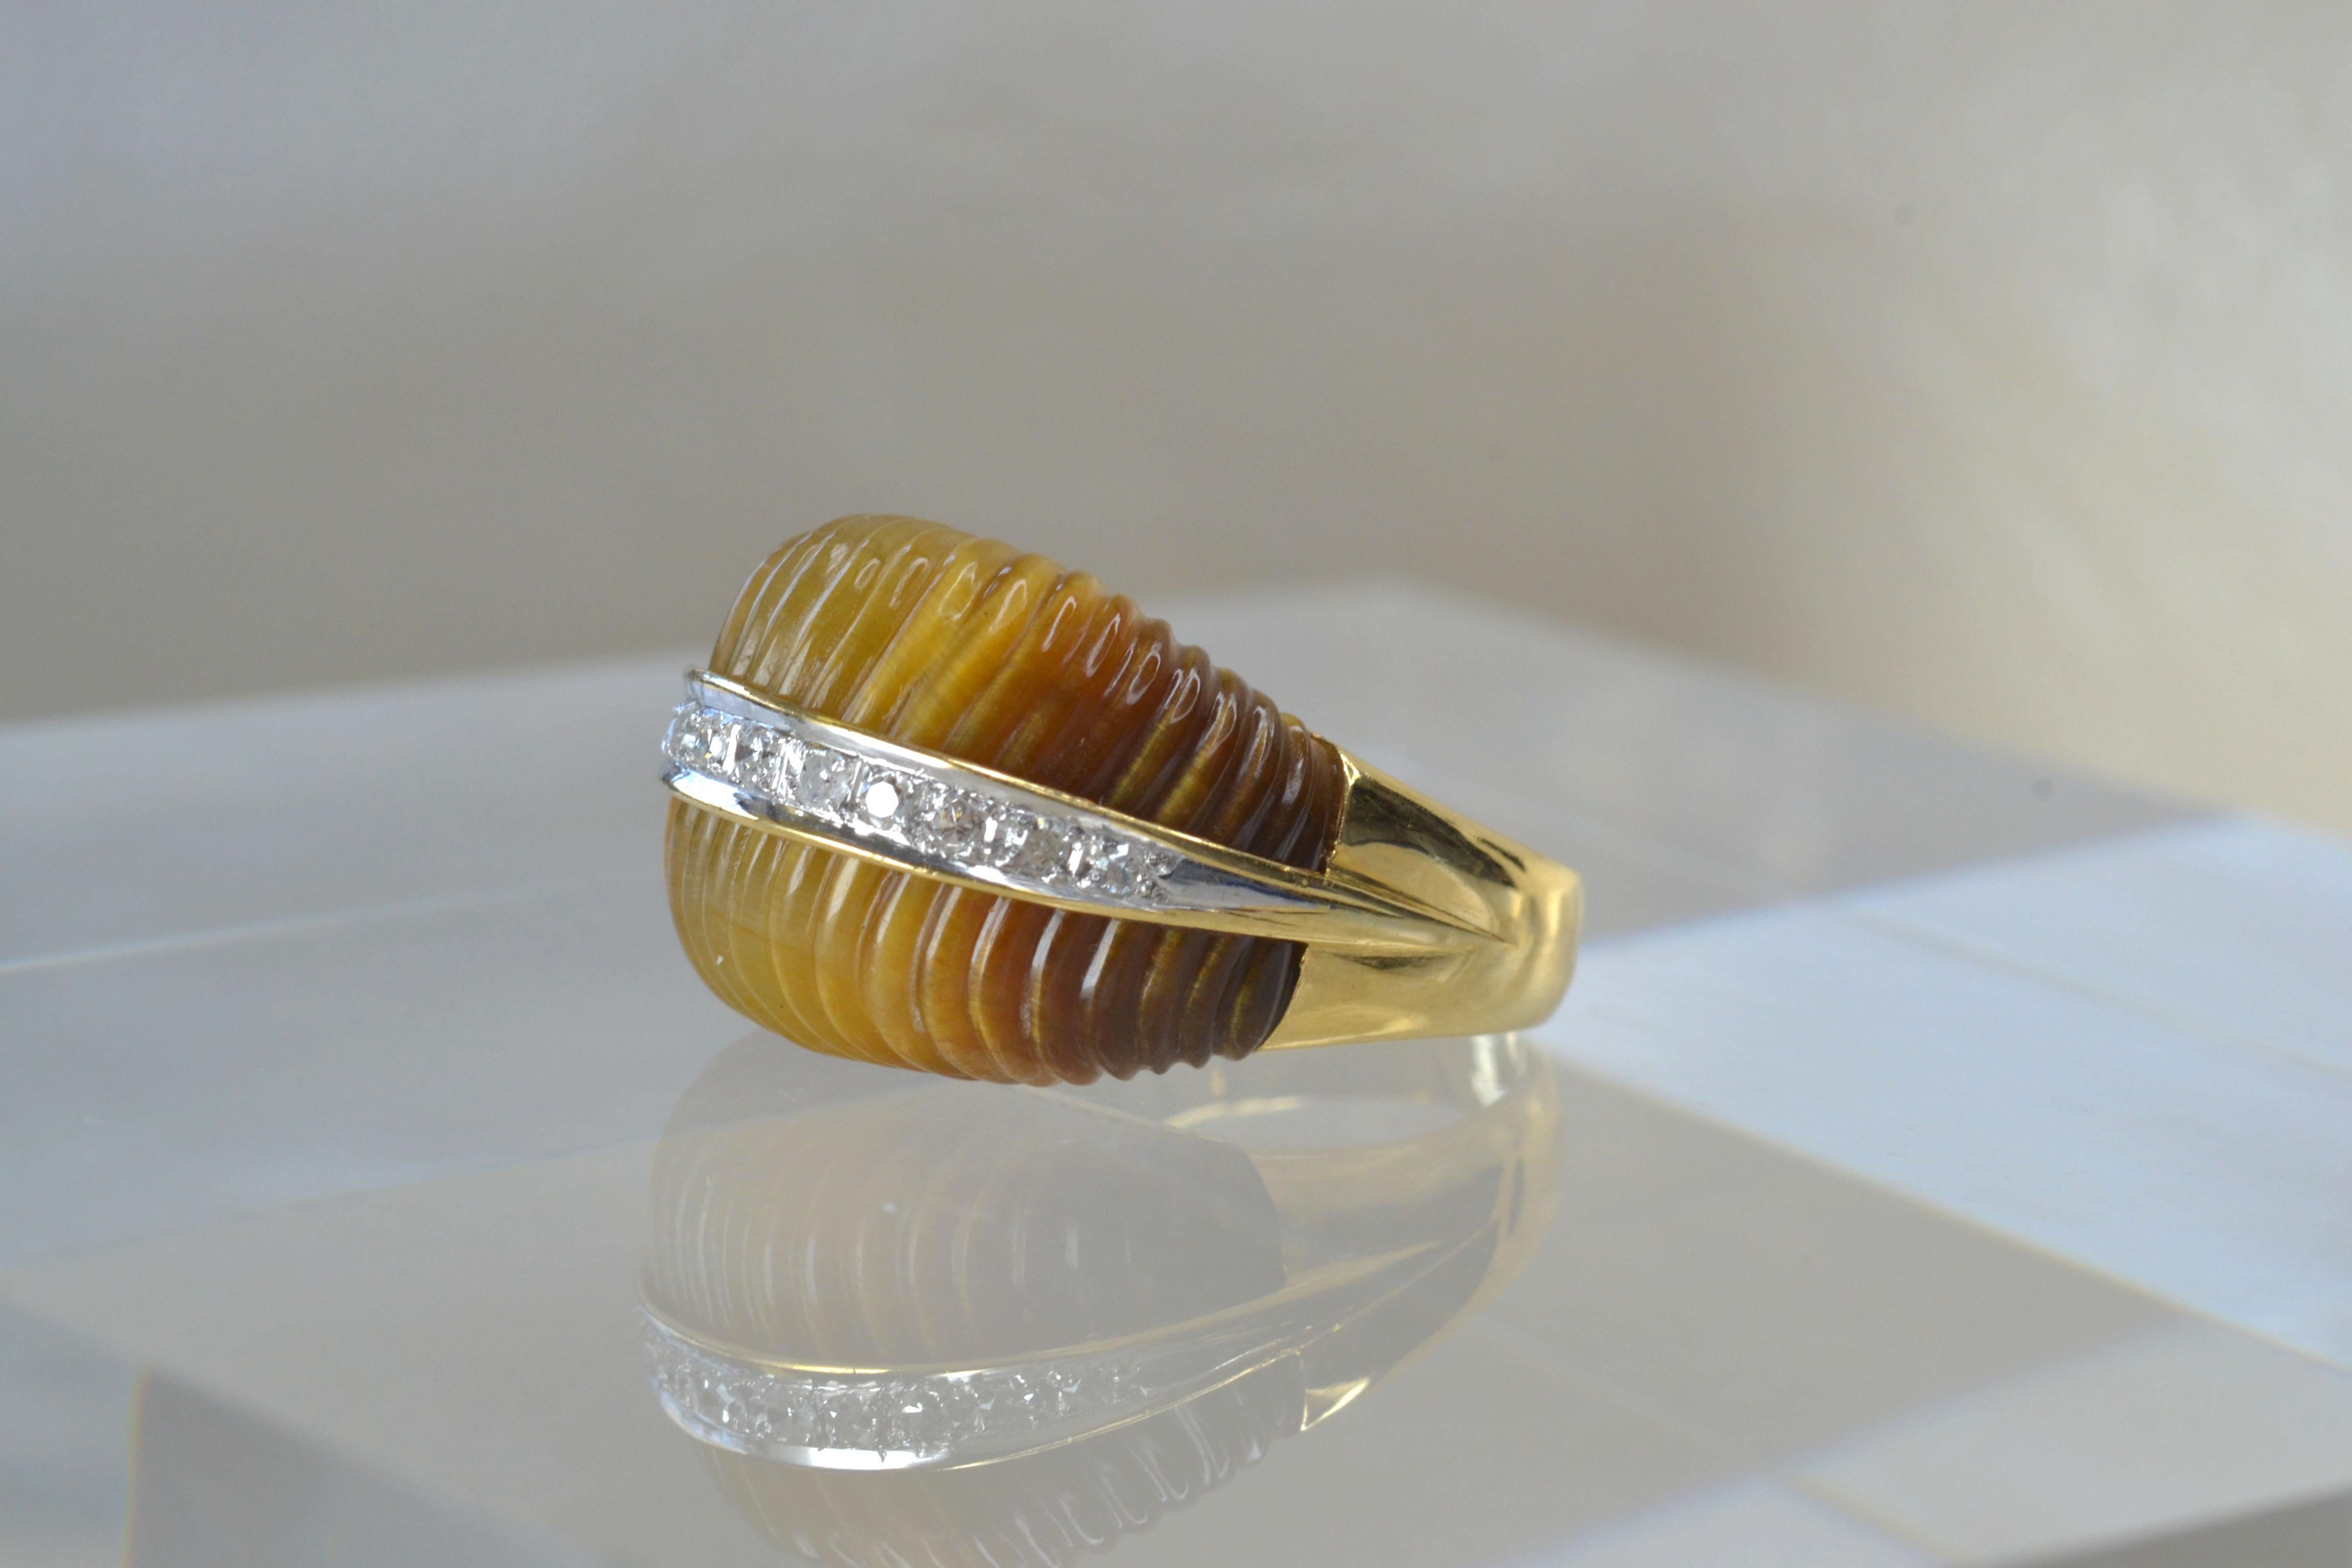 Retro Vintage 14k Gold Tiger's Eye Scalloped Ring One-of-a-kind For Sale